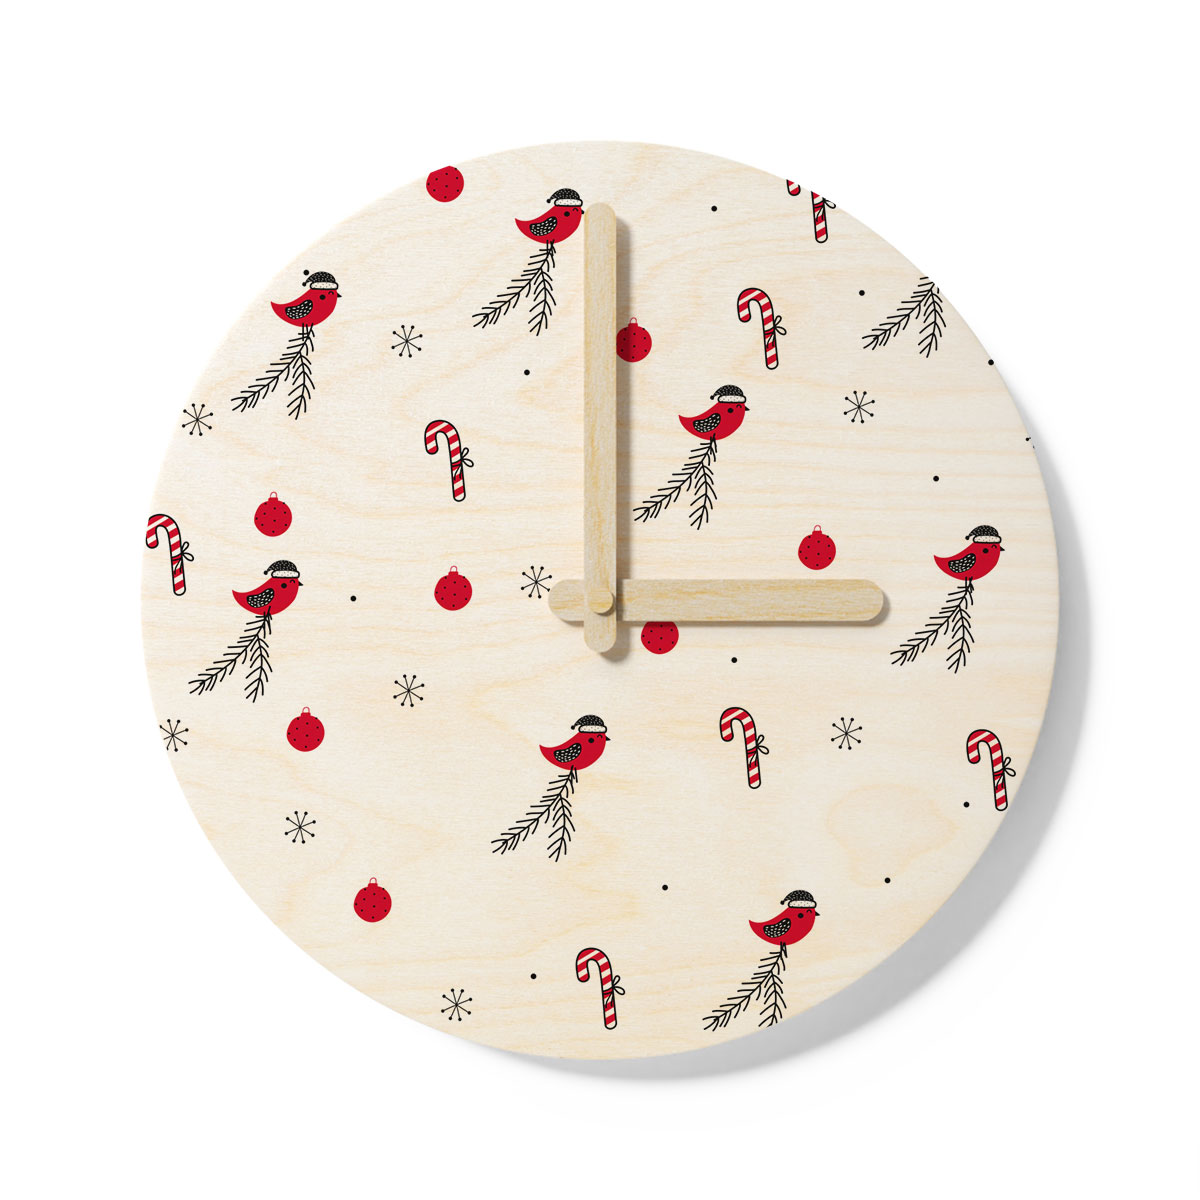 Cardinal Bird With Santa Hat, Candy Canes, Christmas Balls And Snowflake Clipart Seamless White Pattern Wooden Wall Clock